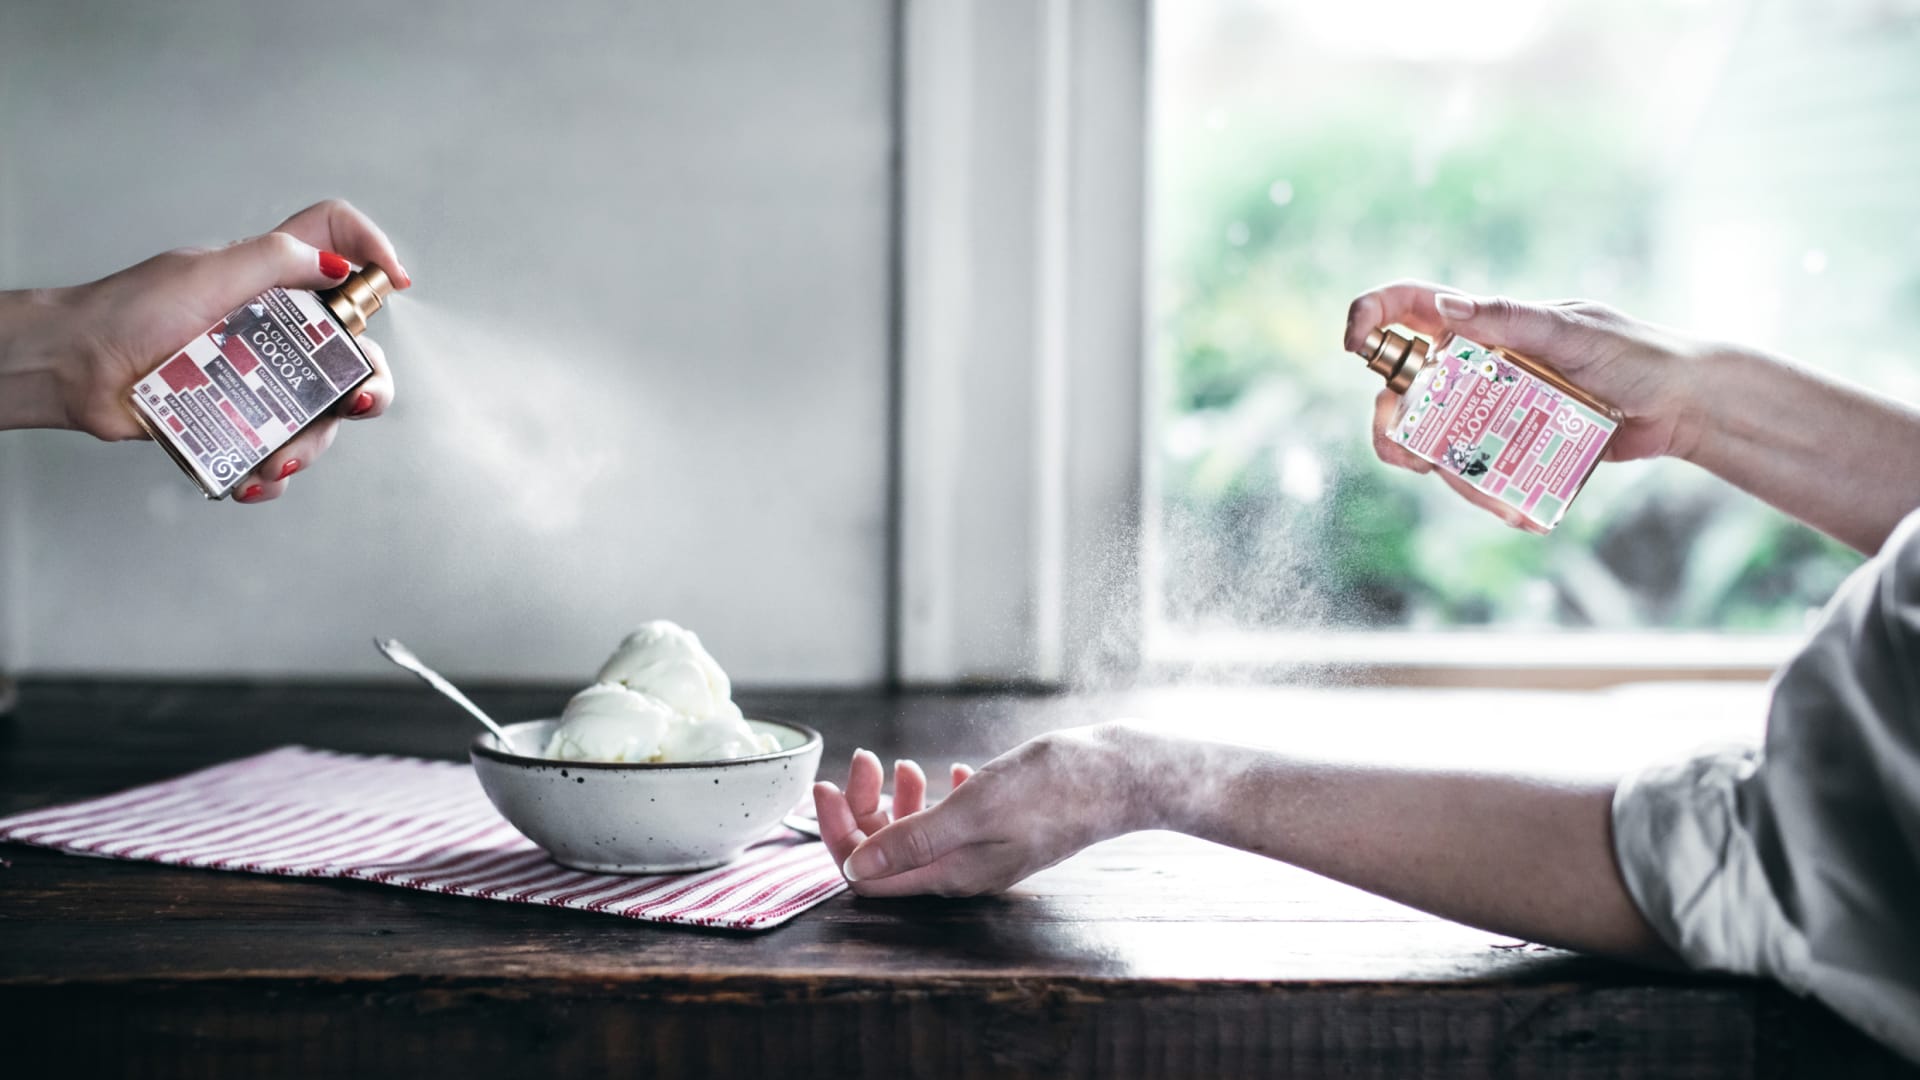 Salt & Straw’s latest ice cream topping is actually a perfume